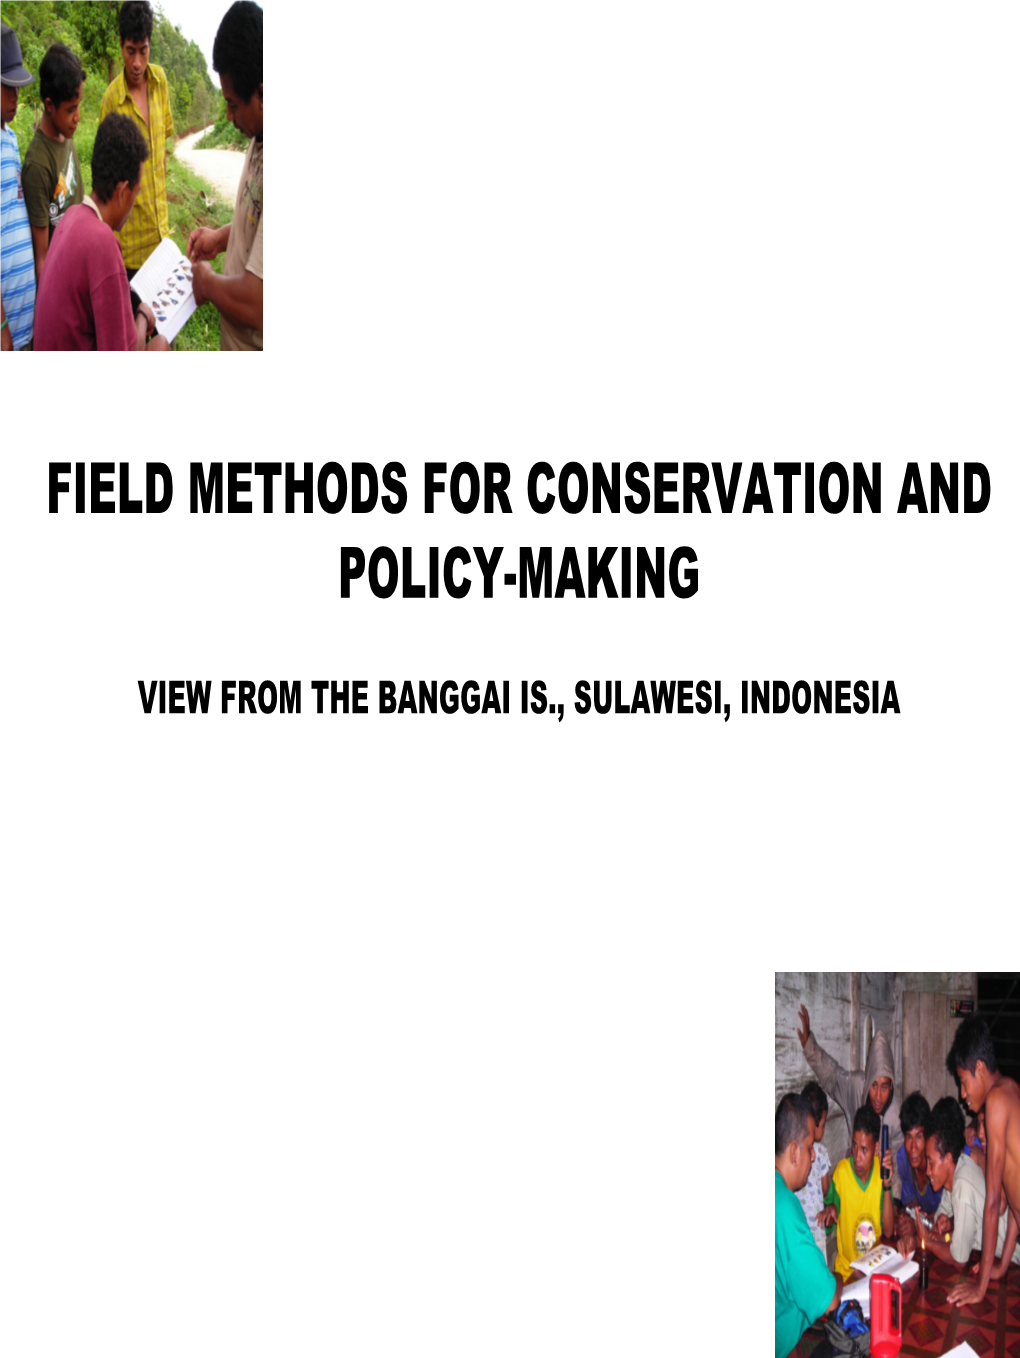 Field Methods for Conservation and Policy-Making